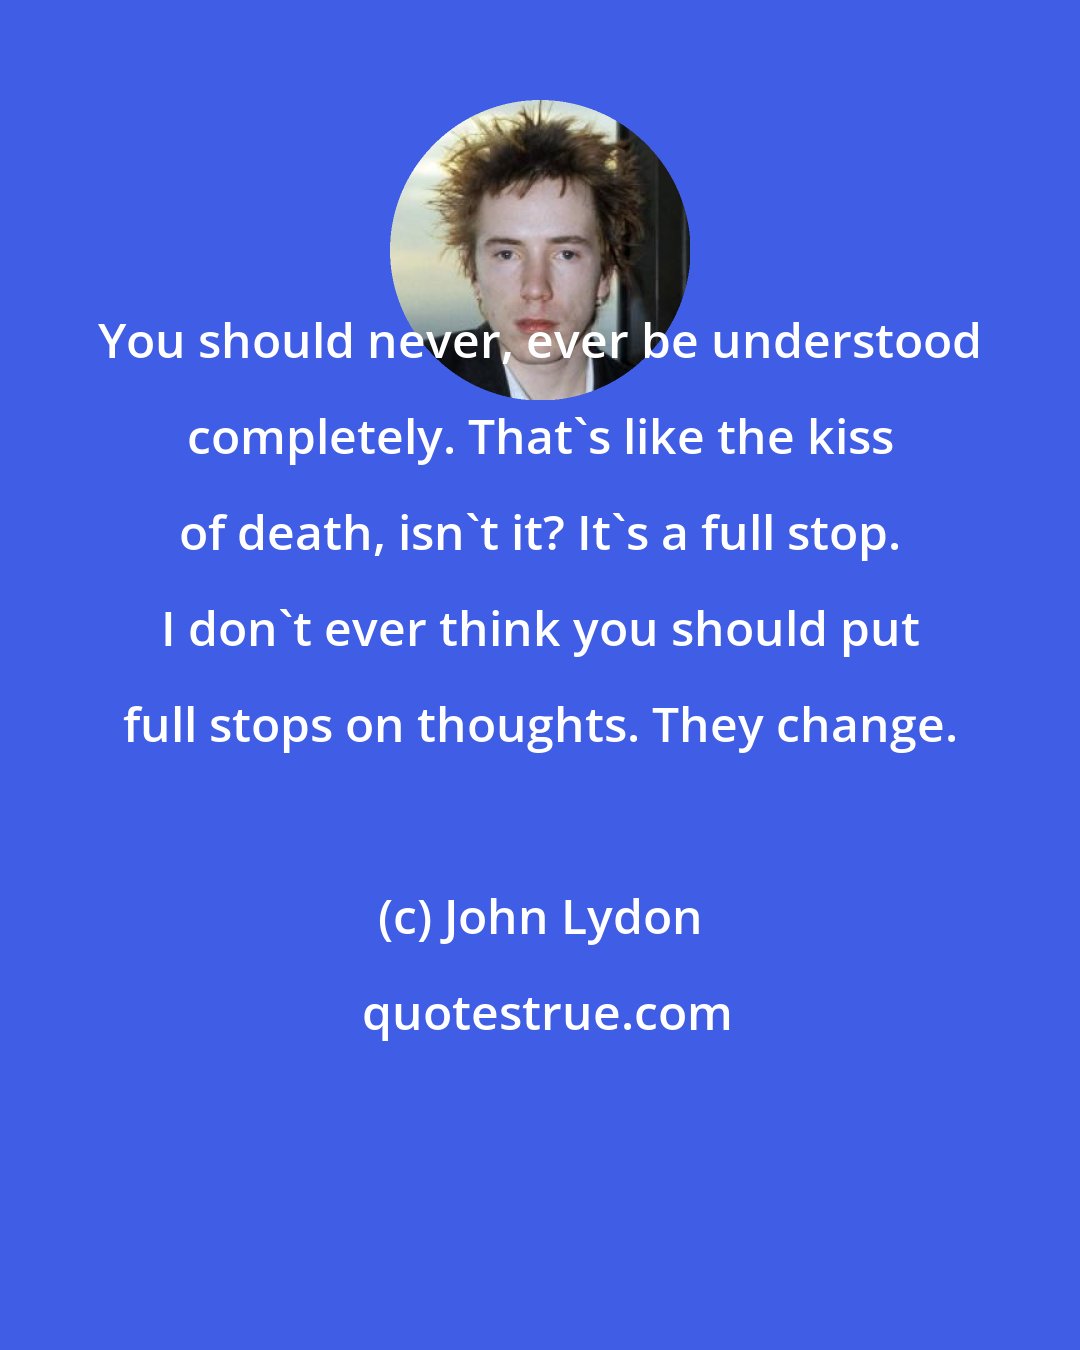 John Lydon: You should never, ever be understood completely. That's like the kiss of death, isn't it? It's a full stop. I don't ever think you should put full stops on thoughts. They change.